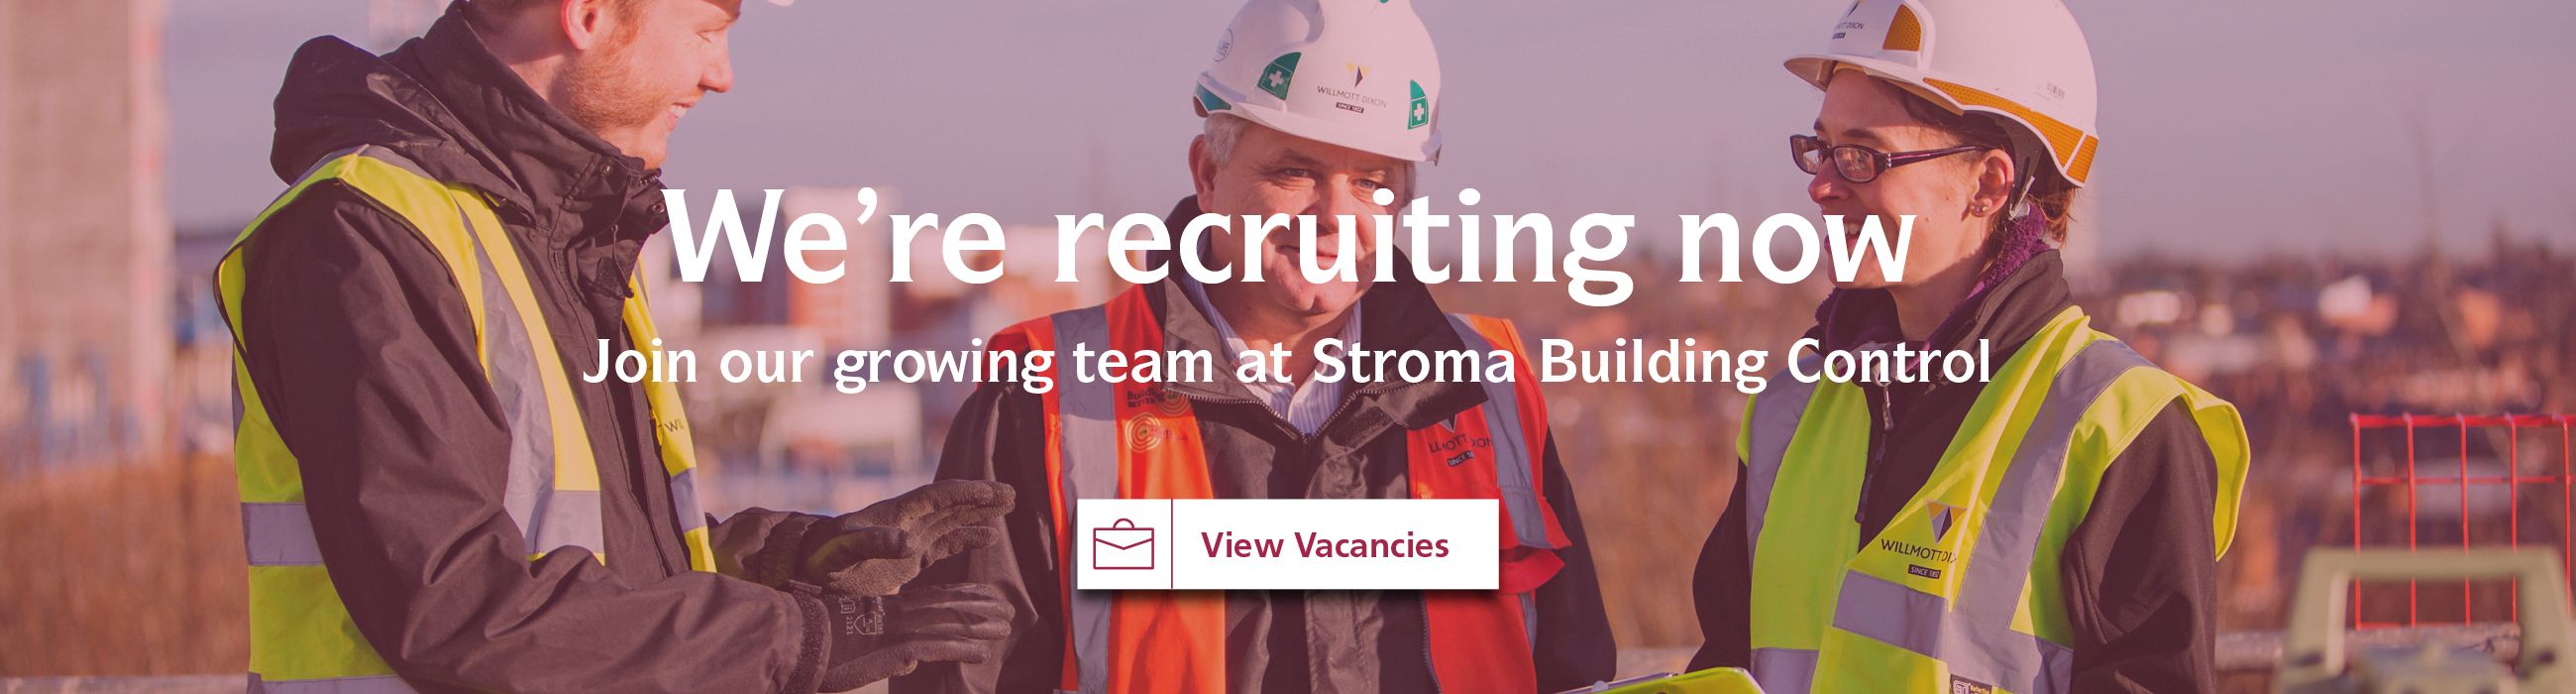 Careers at Stroma Building Control